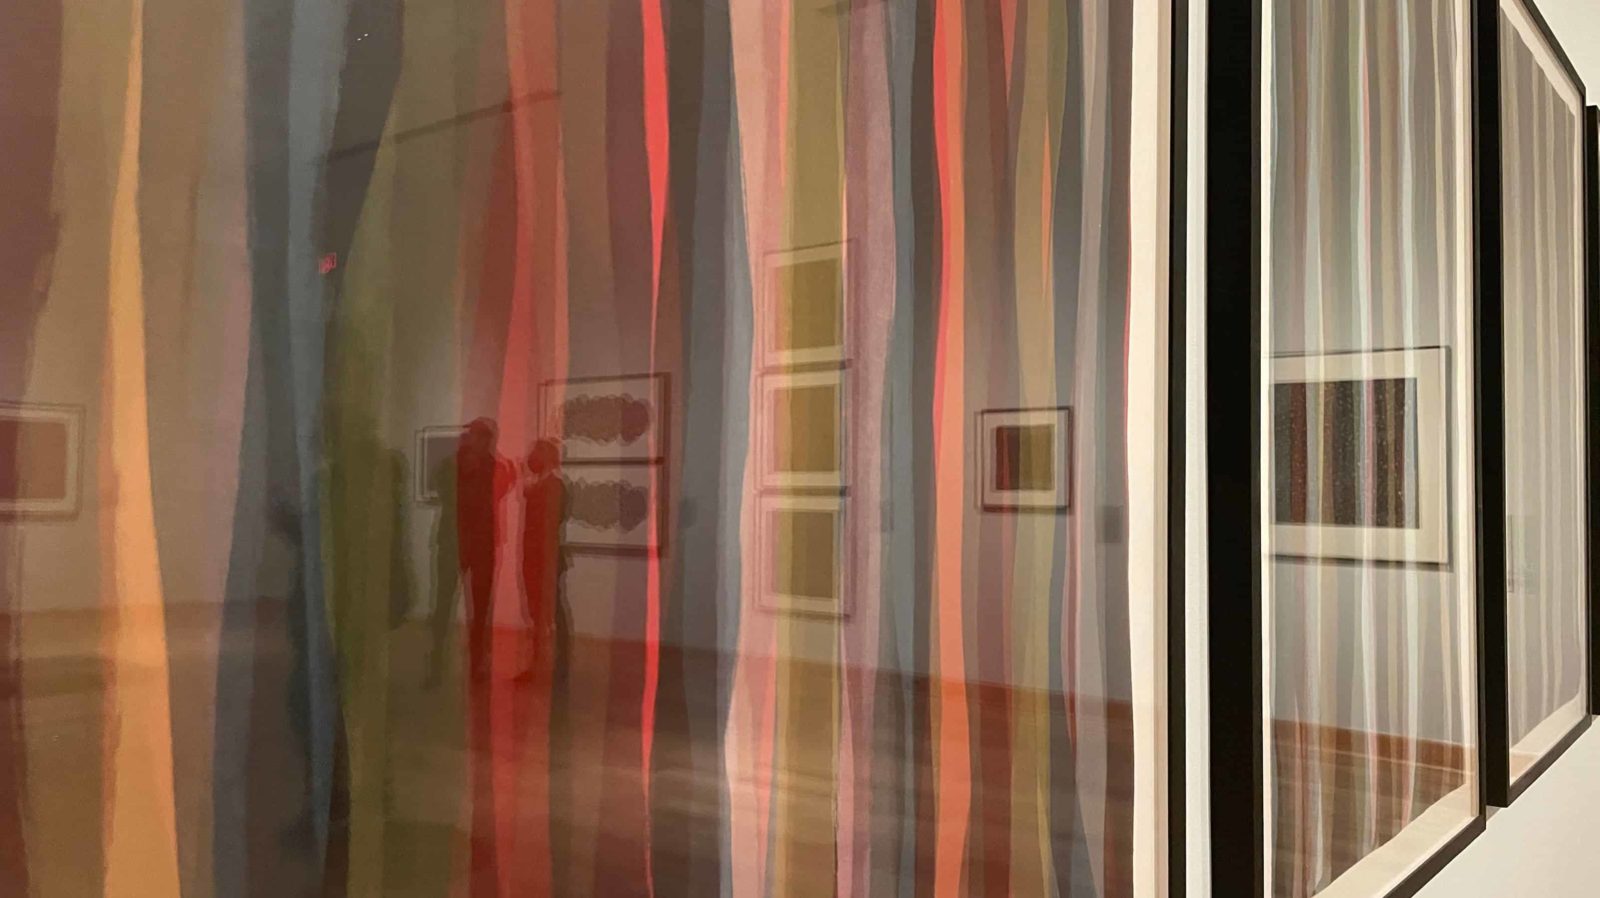 Sol LeWitt's print Brushstrokes in Two Different Colors in Two Directions appears in Strict Beauty at the Williams College Museum of Art. Press image by Kate Abbott courtesy of WCMA